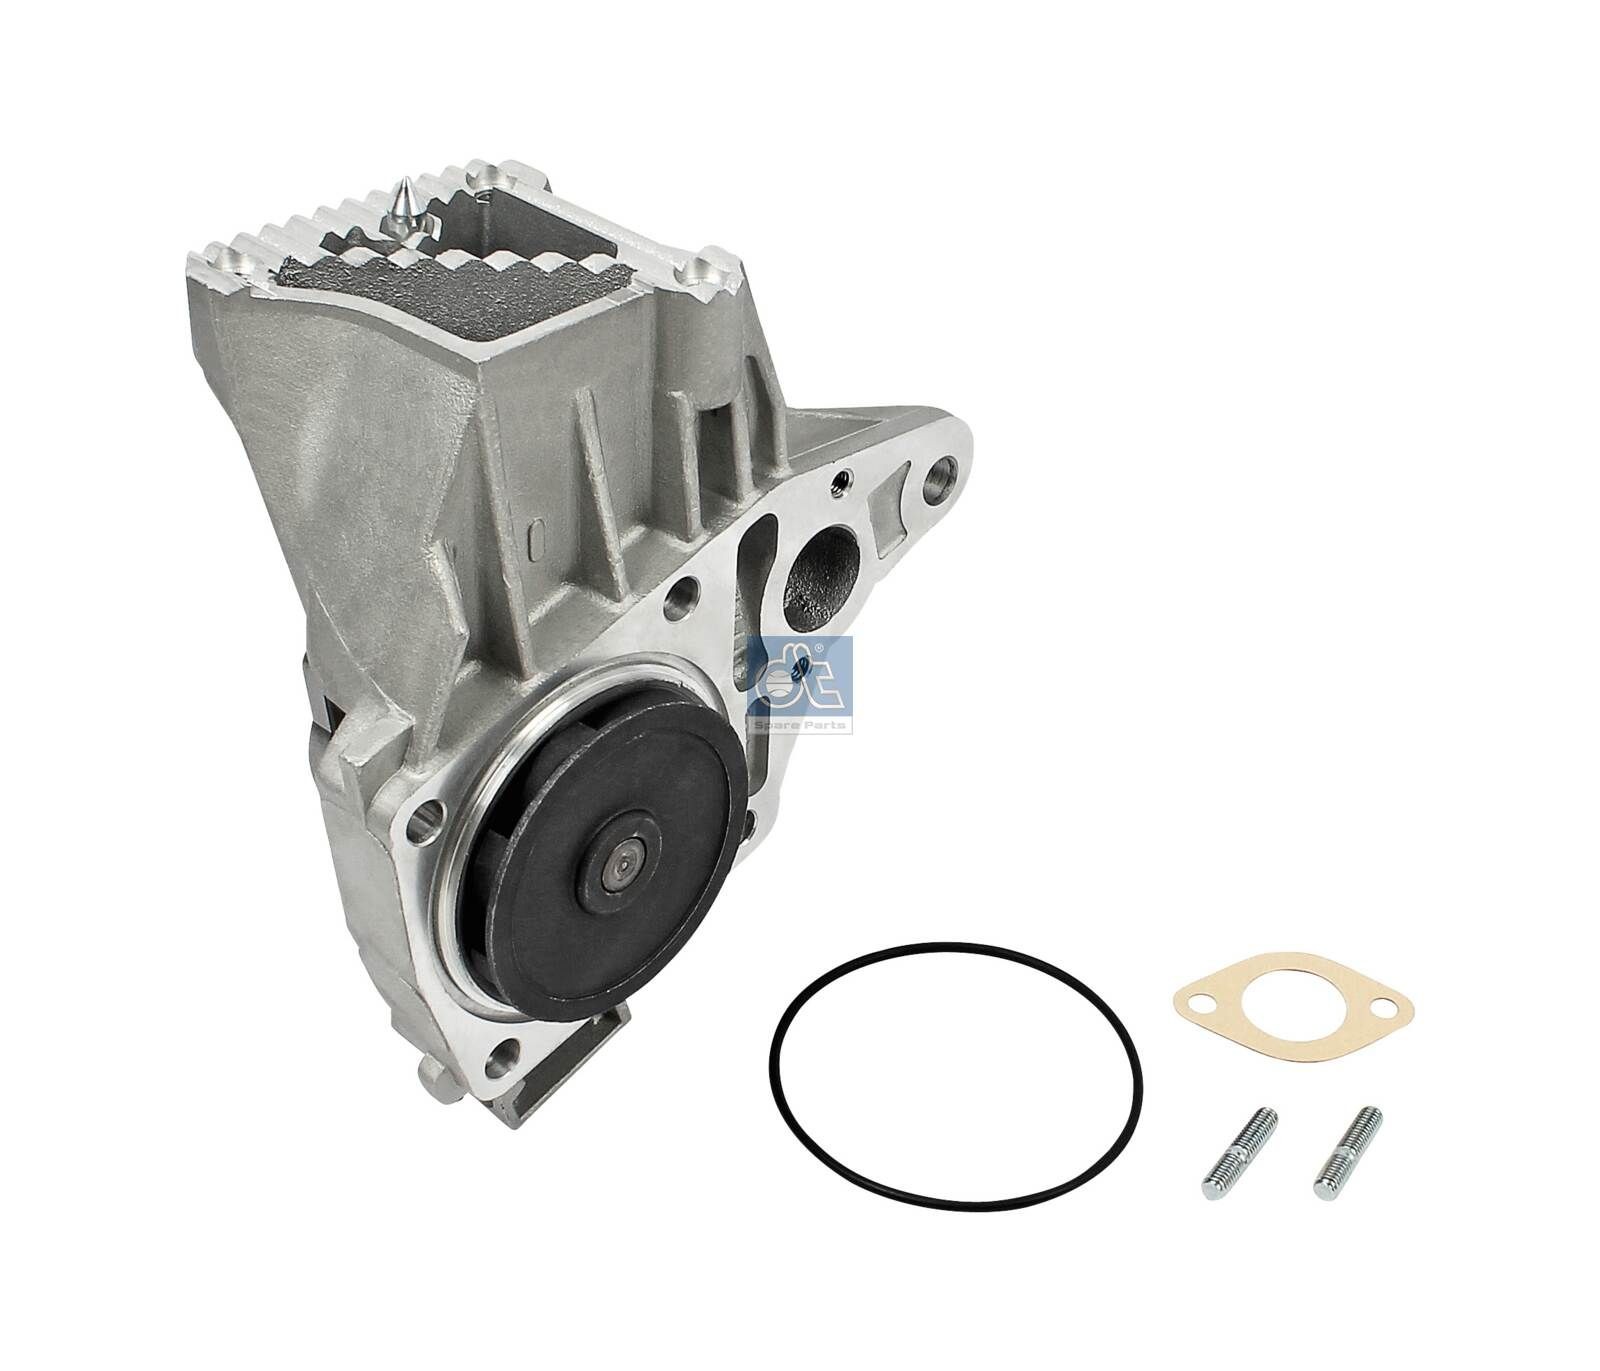 Opel ZAFIRA Engine water pump 9975489 DT Spare Parts 6.30031 online buy